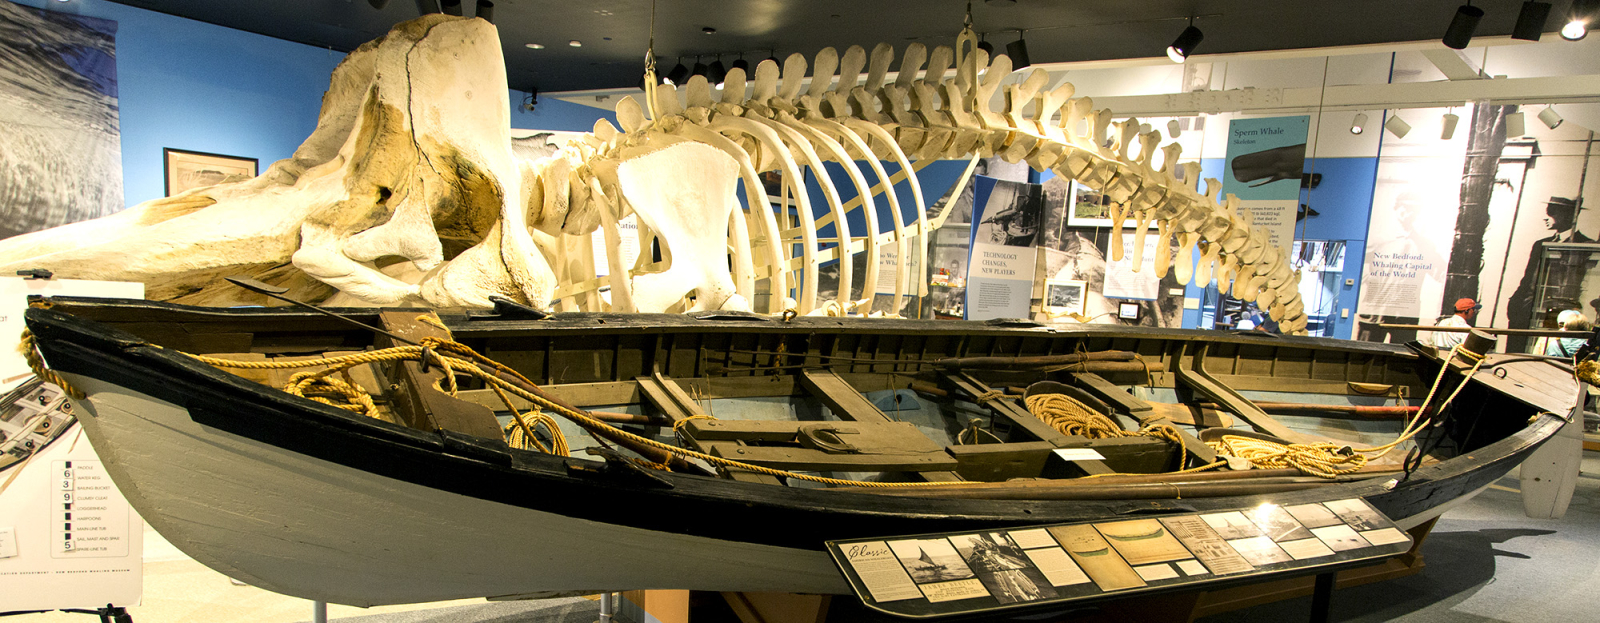 Whaleboat and whale